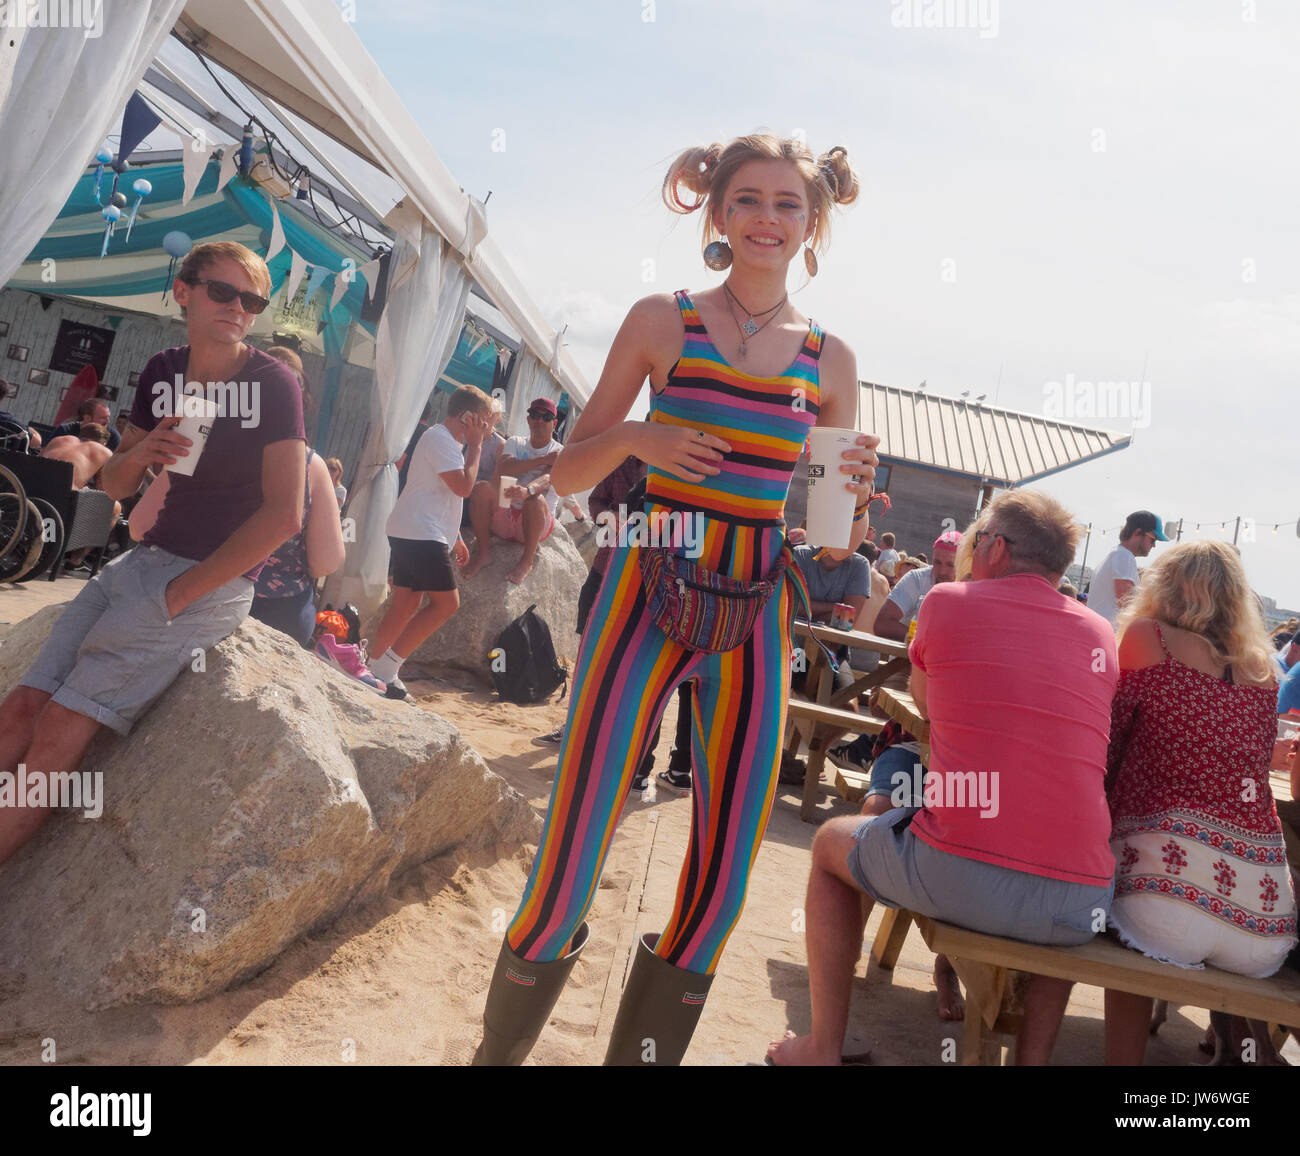 Boardmasters Cornwall colorfull spectators at Festival surfing Stock Photo